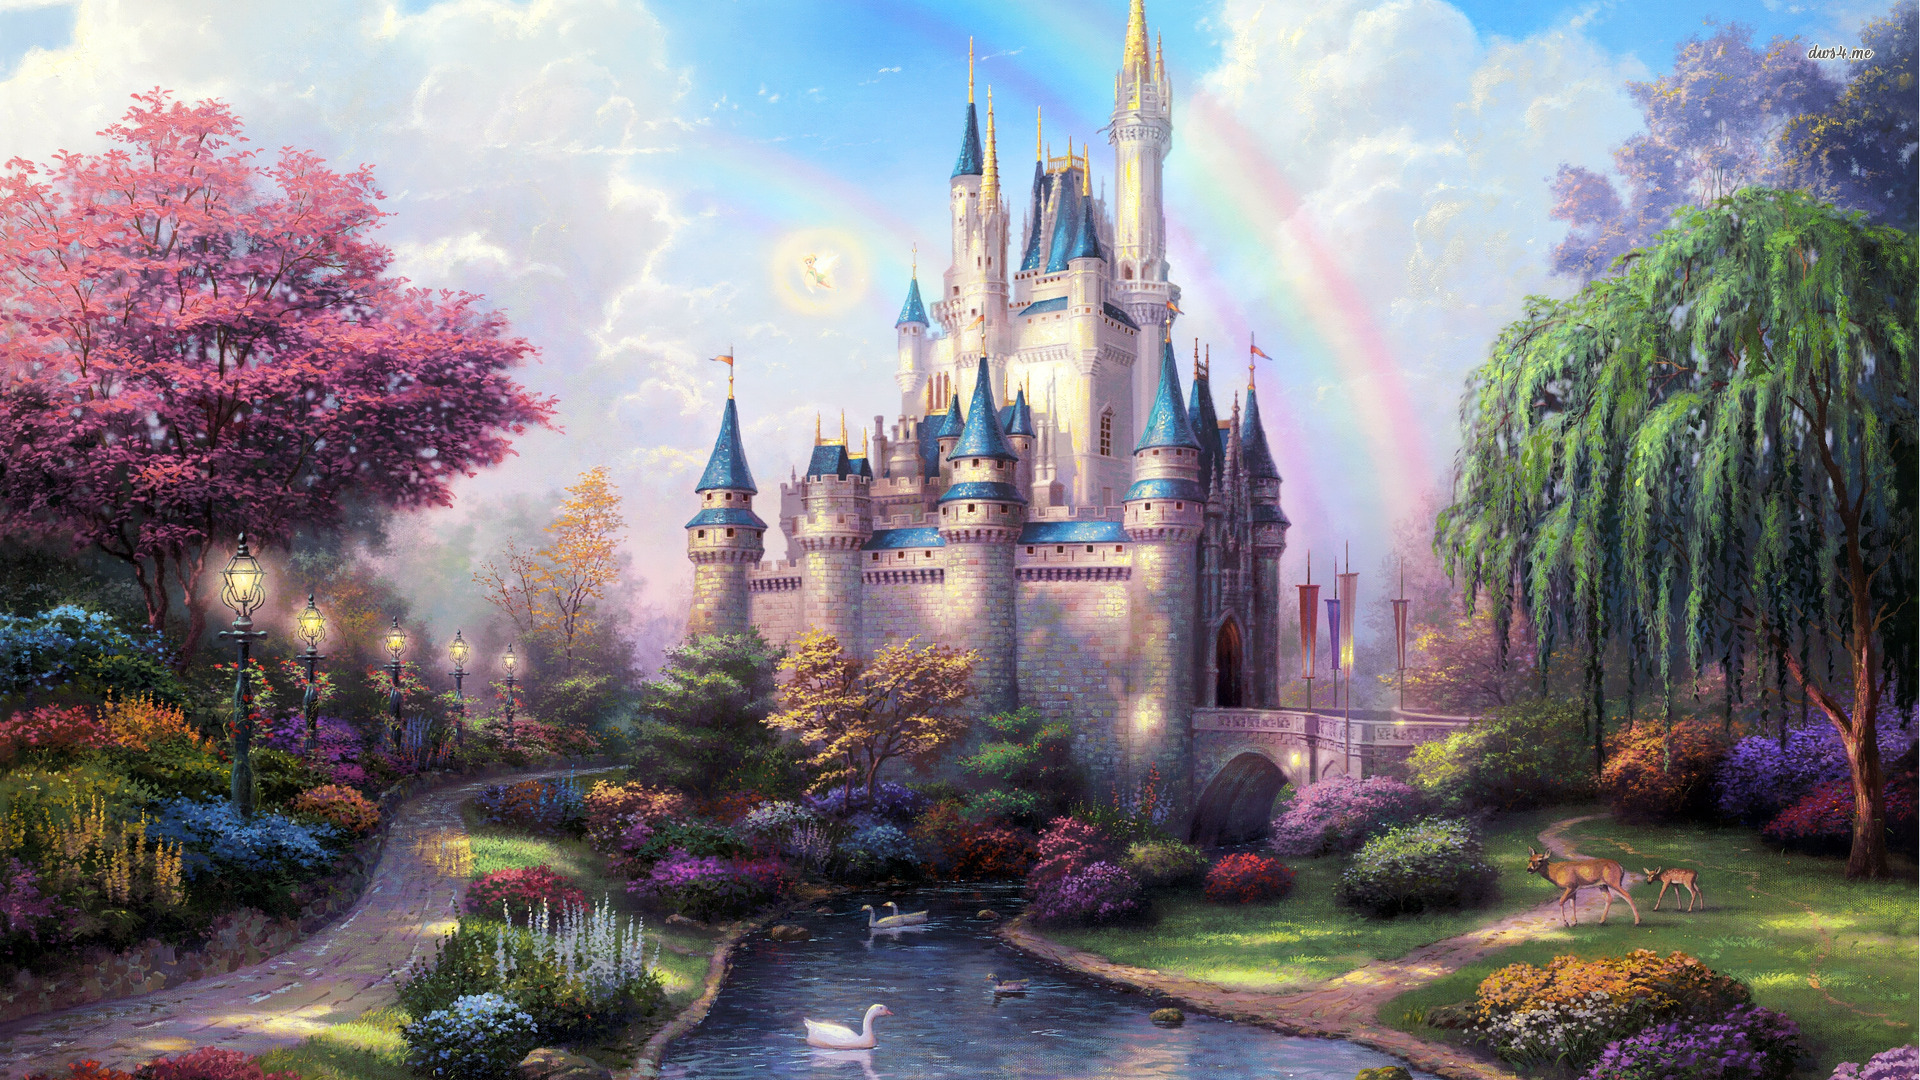 40 HD Castle Wallpapers 19201080 For Free Download